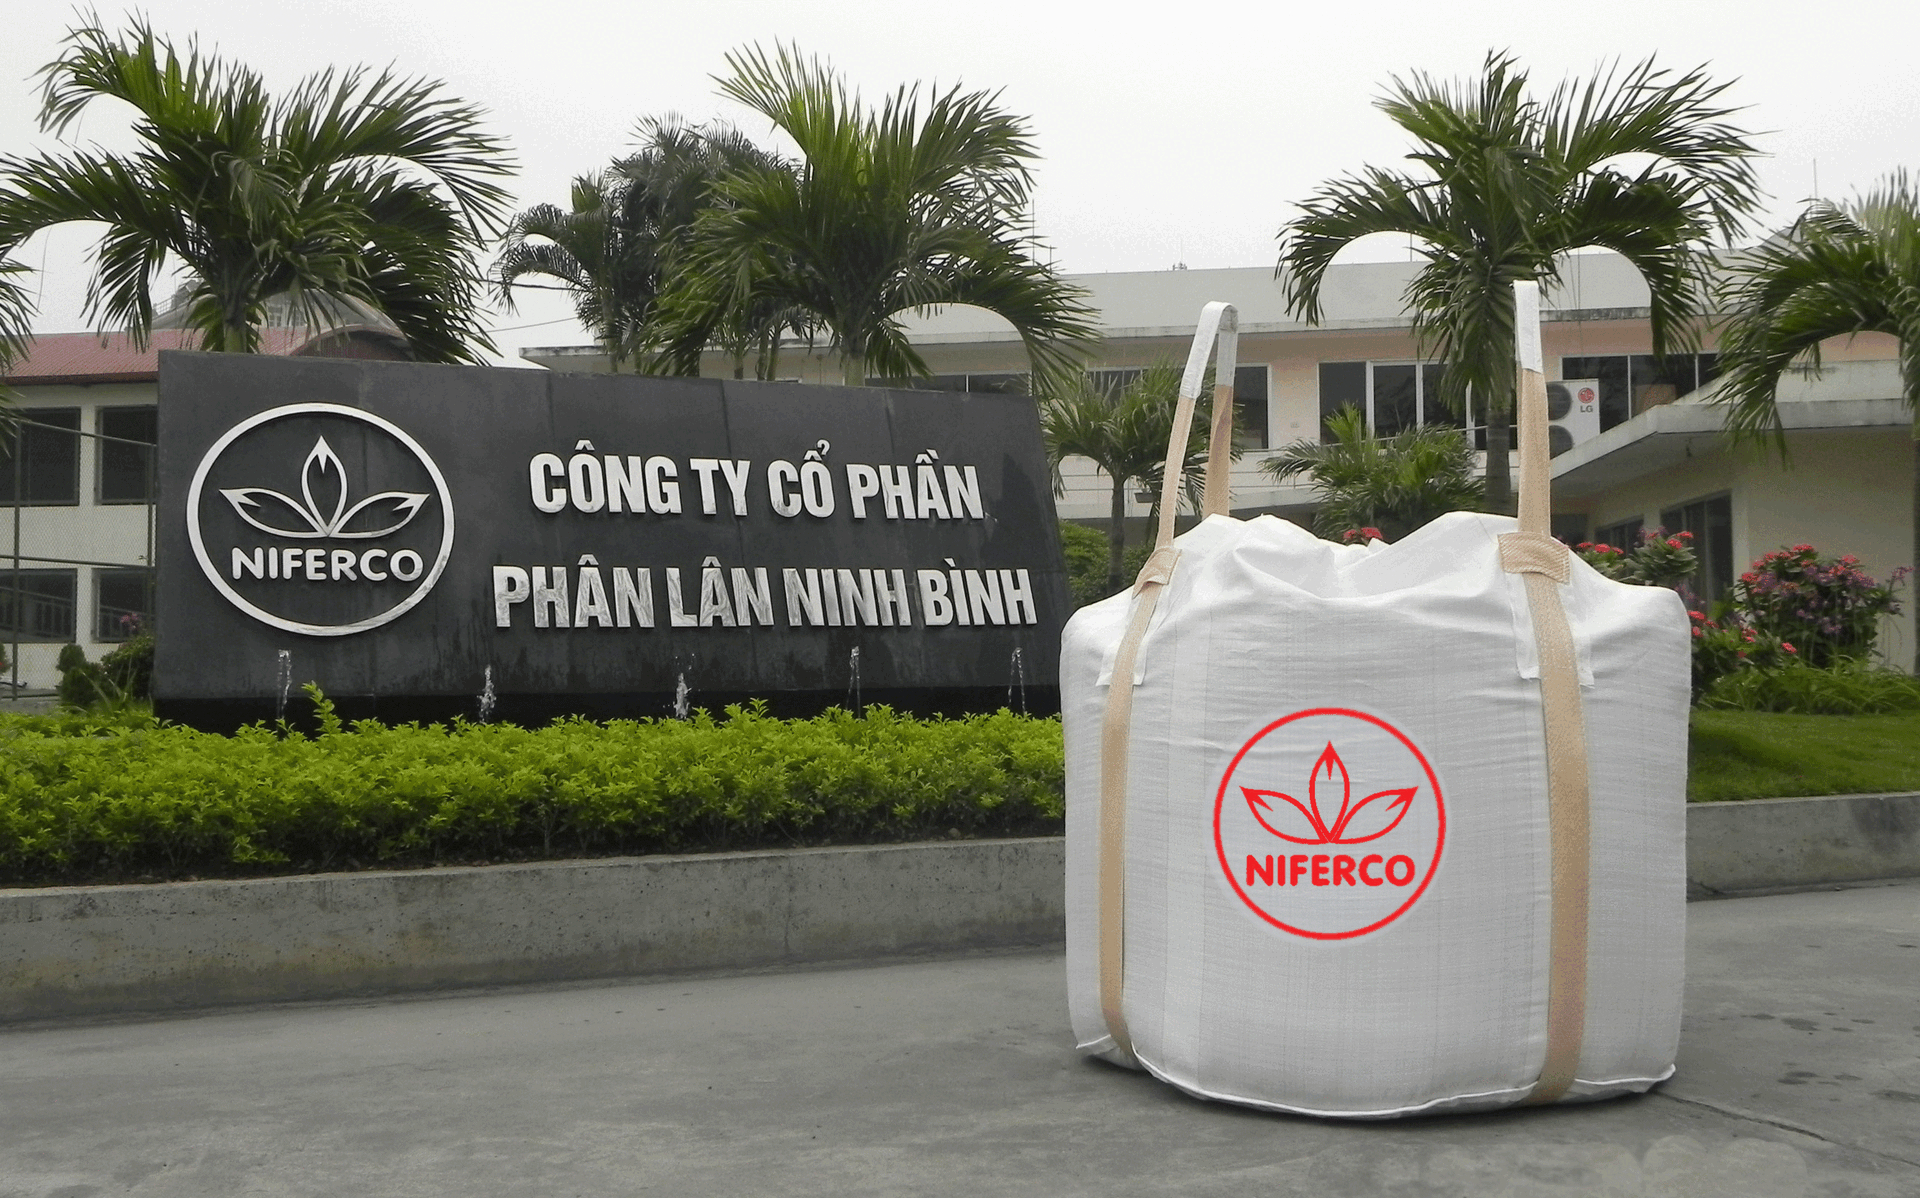 Fused phosphate products exported in jumbo bags of Ninh Binh Phosphate Joint Stock Company.